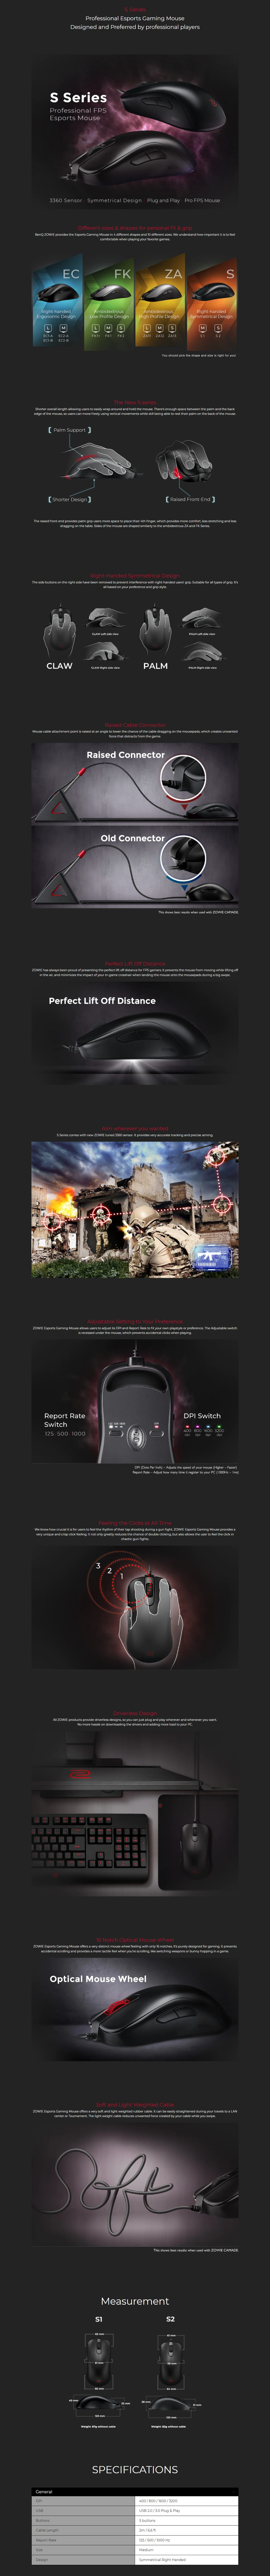 A large marketing image providing additional information about the product BenQ ZOWIE S1 Medium eSports Gaming Mouse - Additional alt info not provided